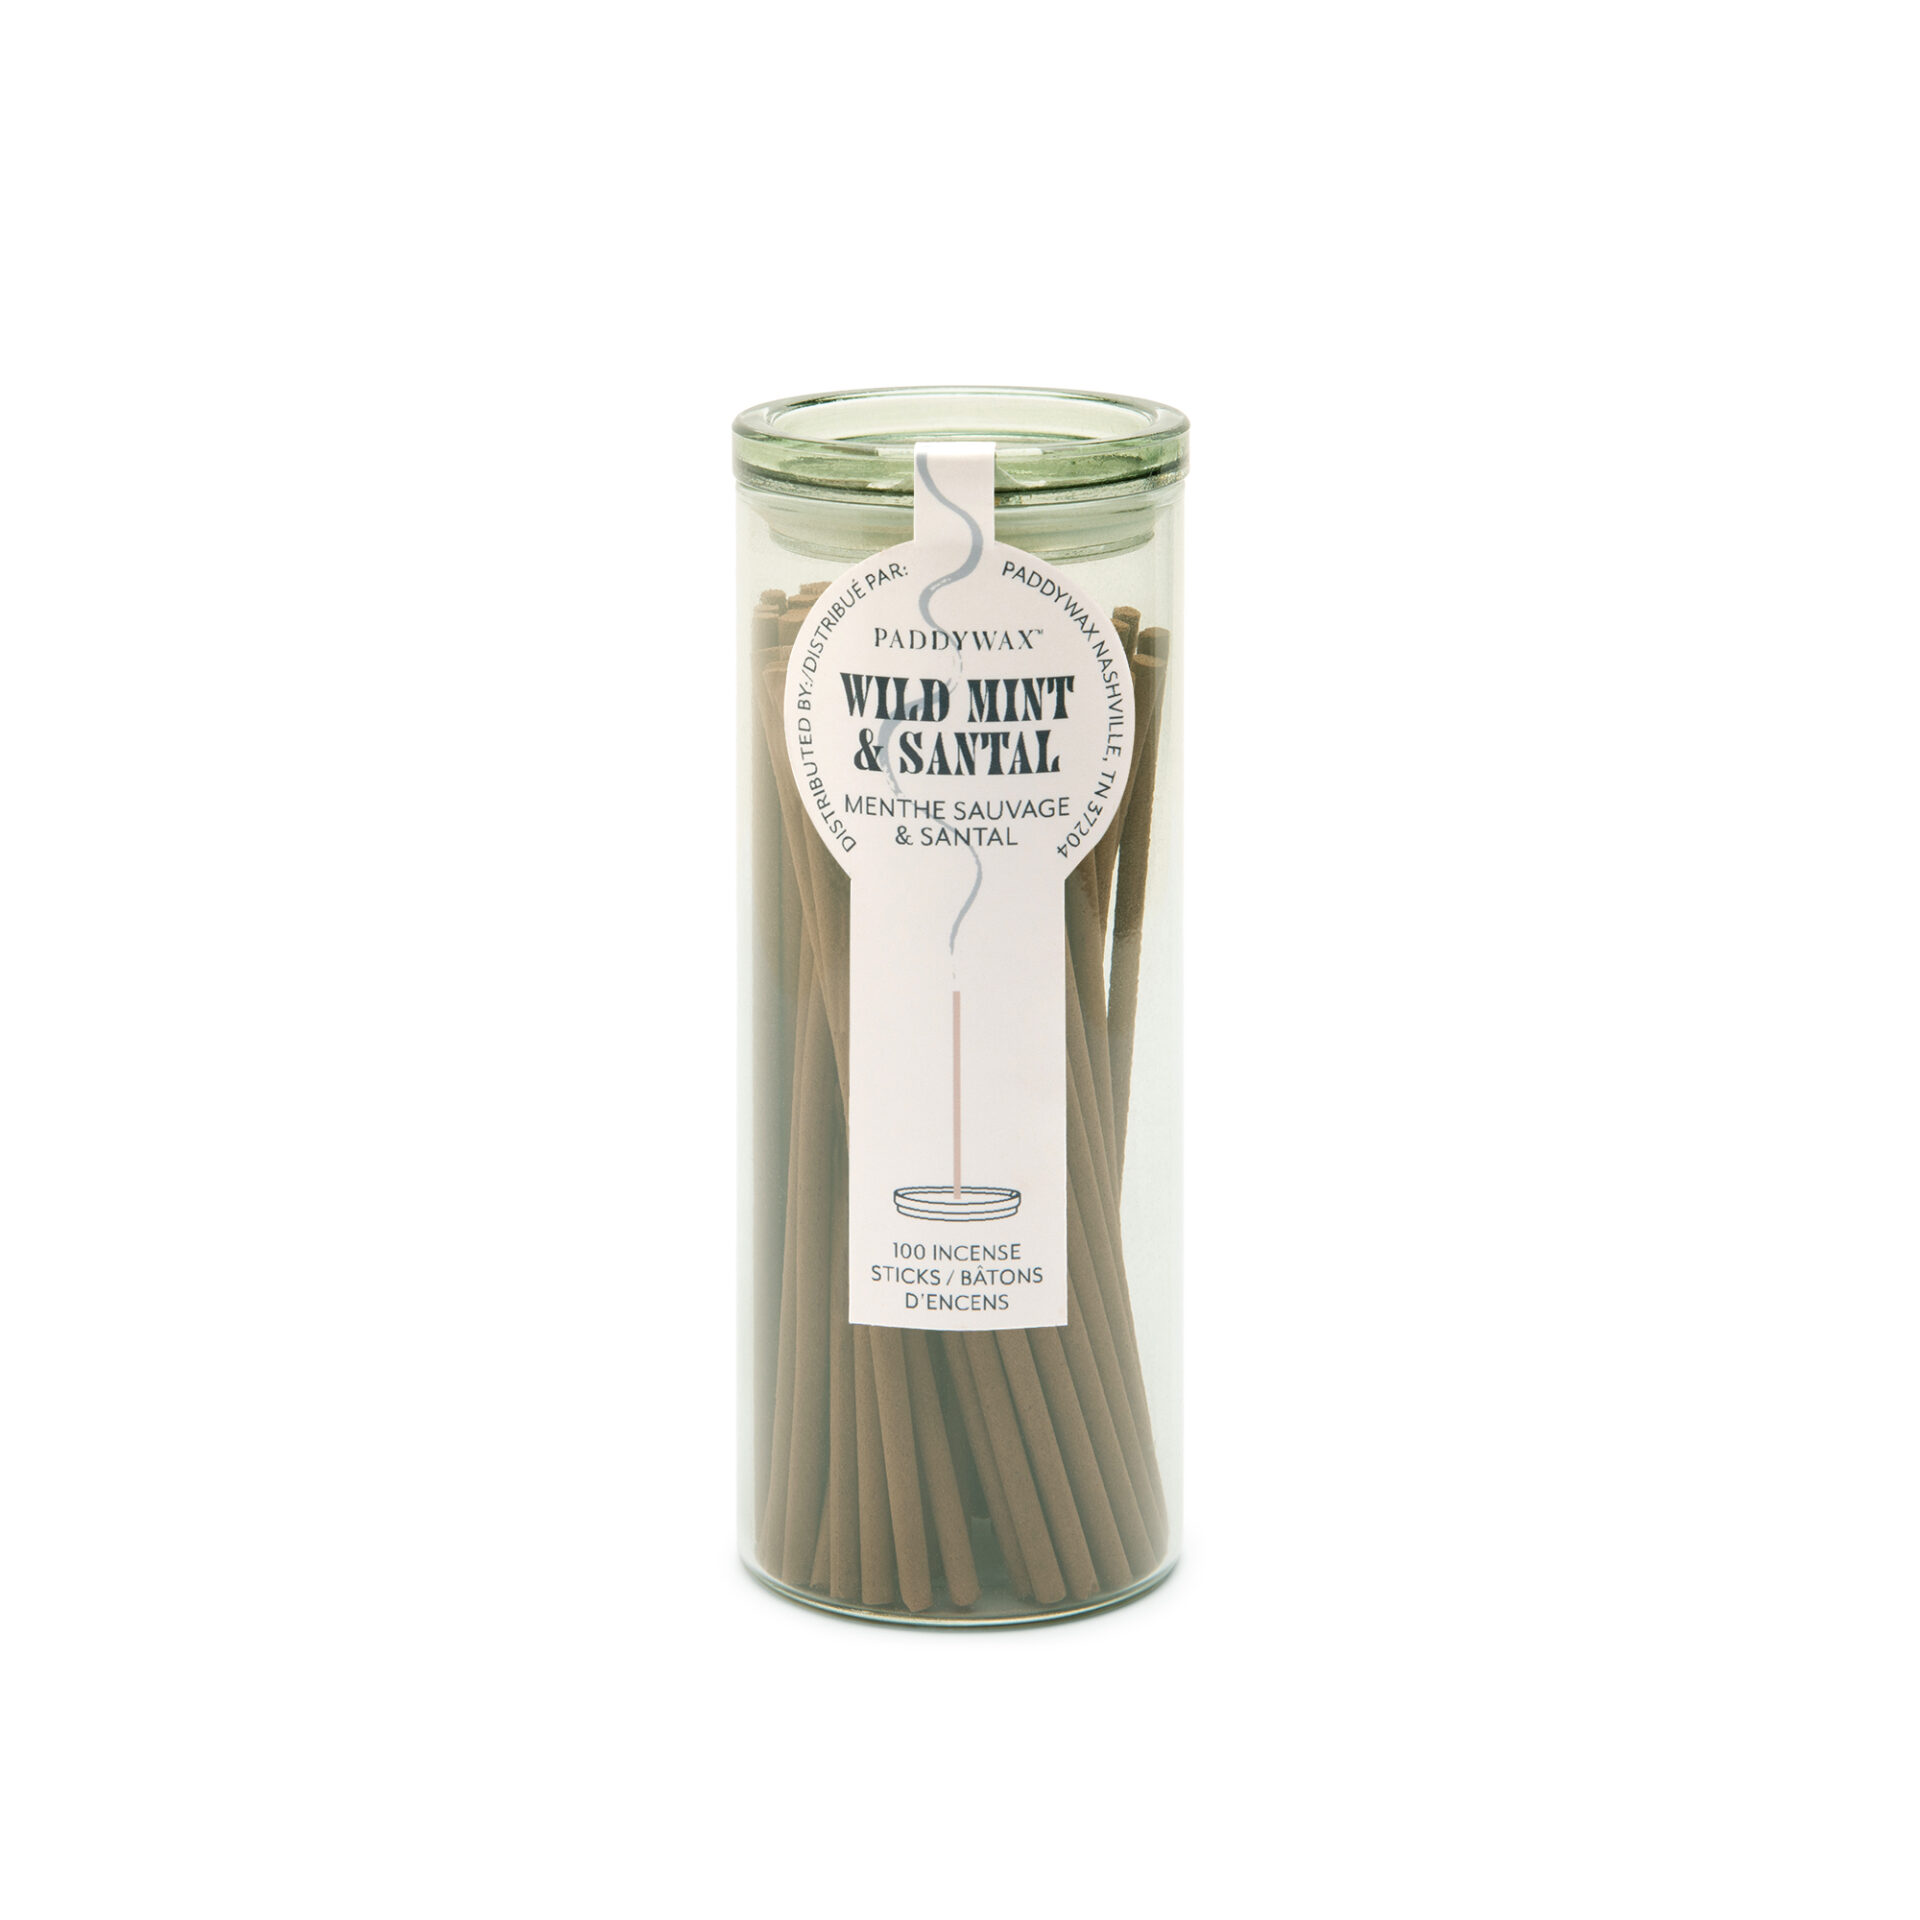 incense sticks wild mint and santal by paddywax